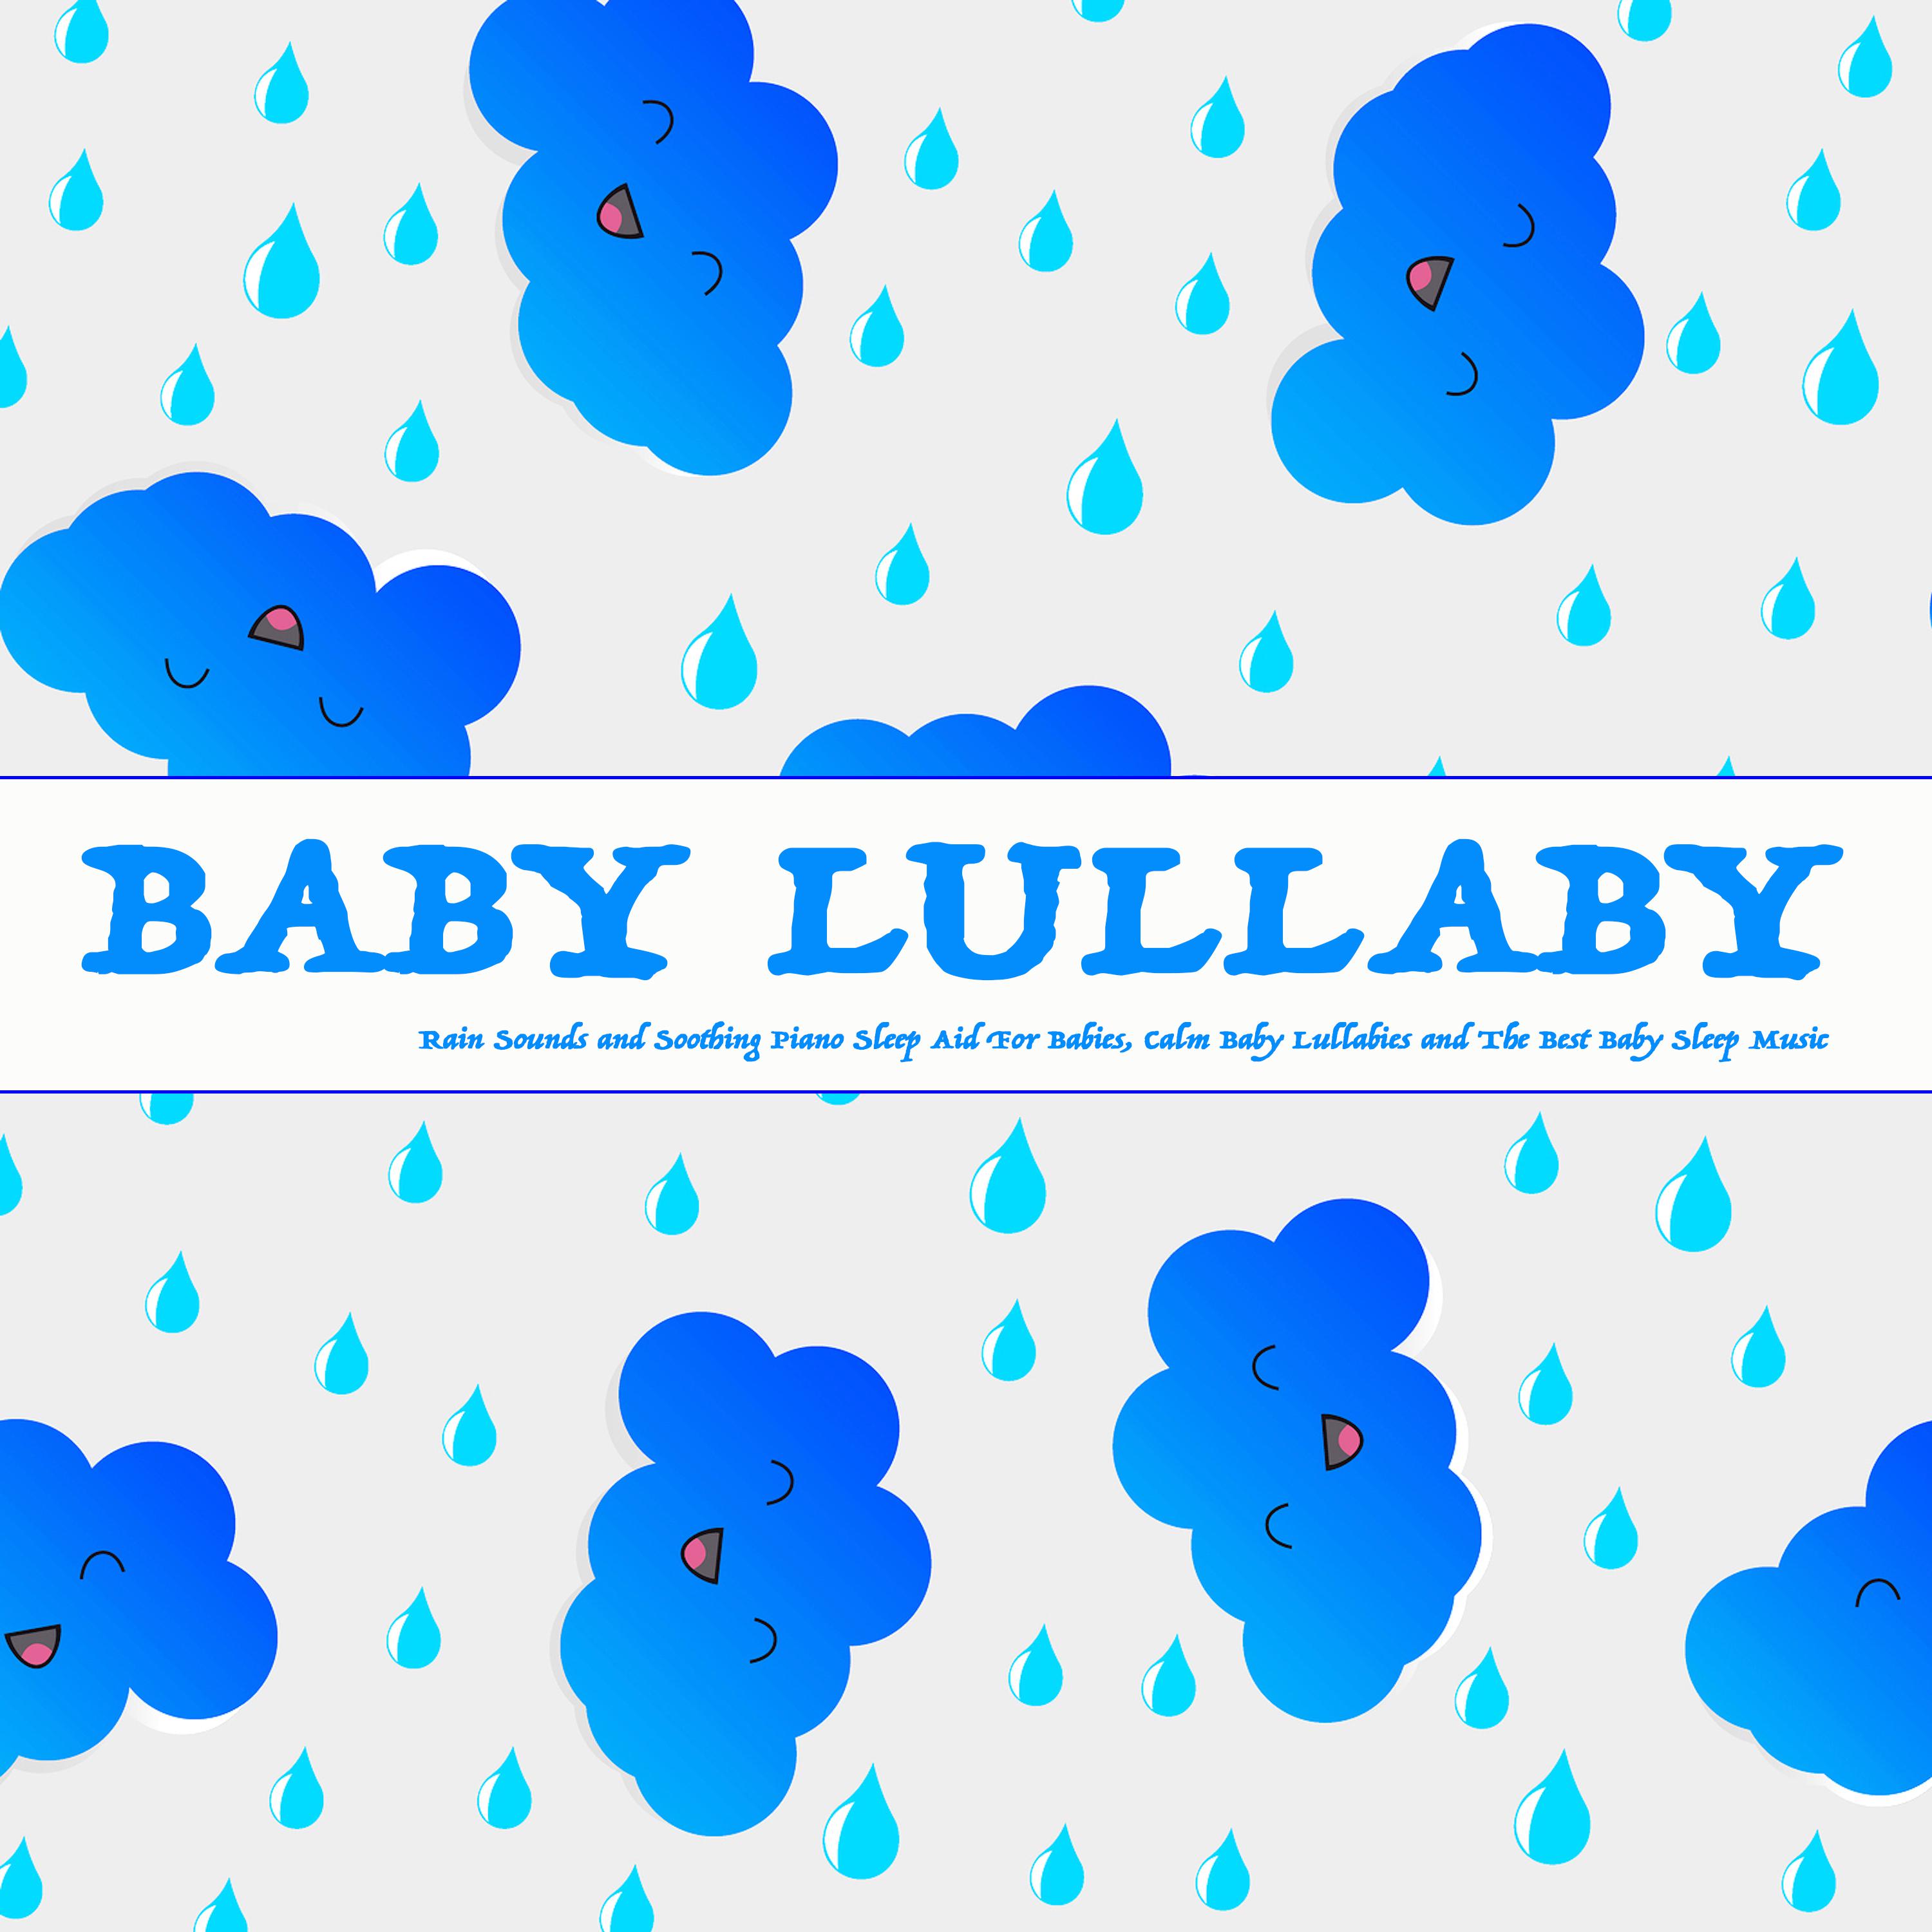 Baby Lullaby - Soft Rain and Piano Music For Babies